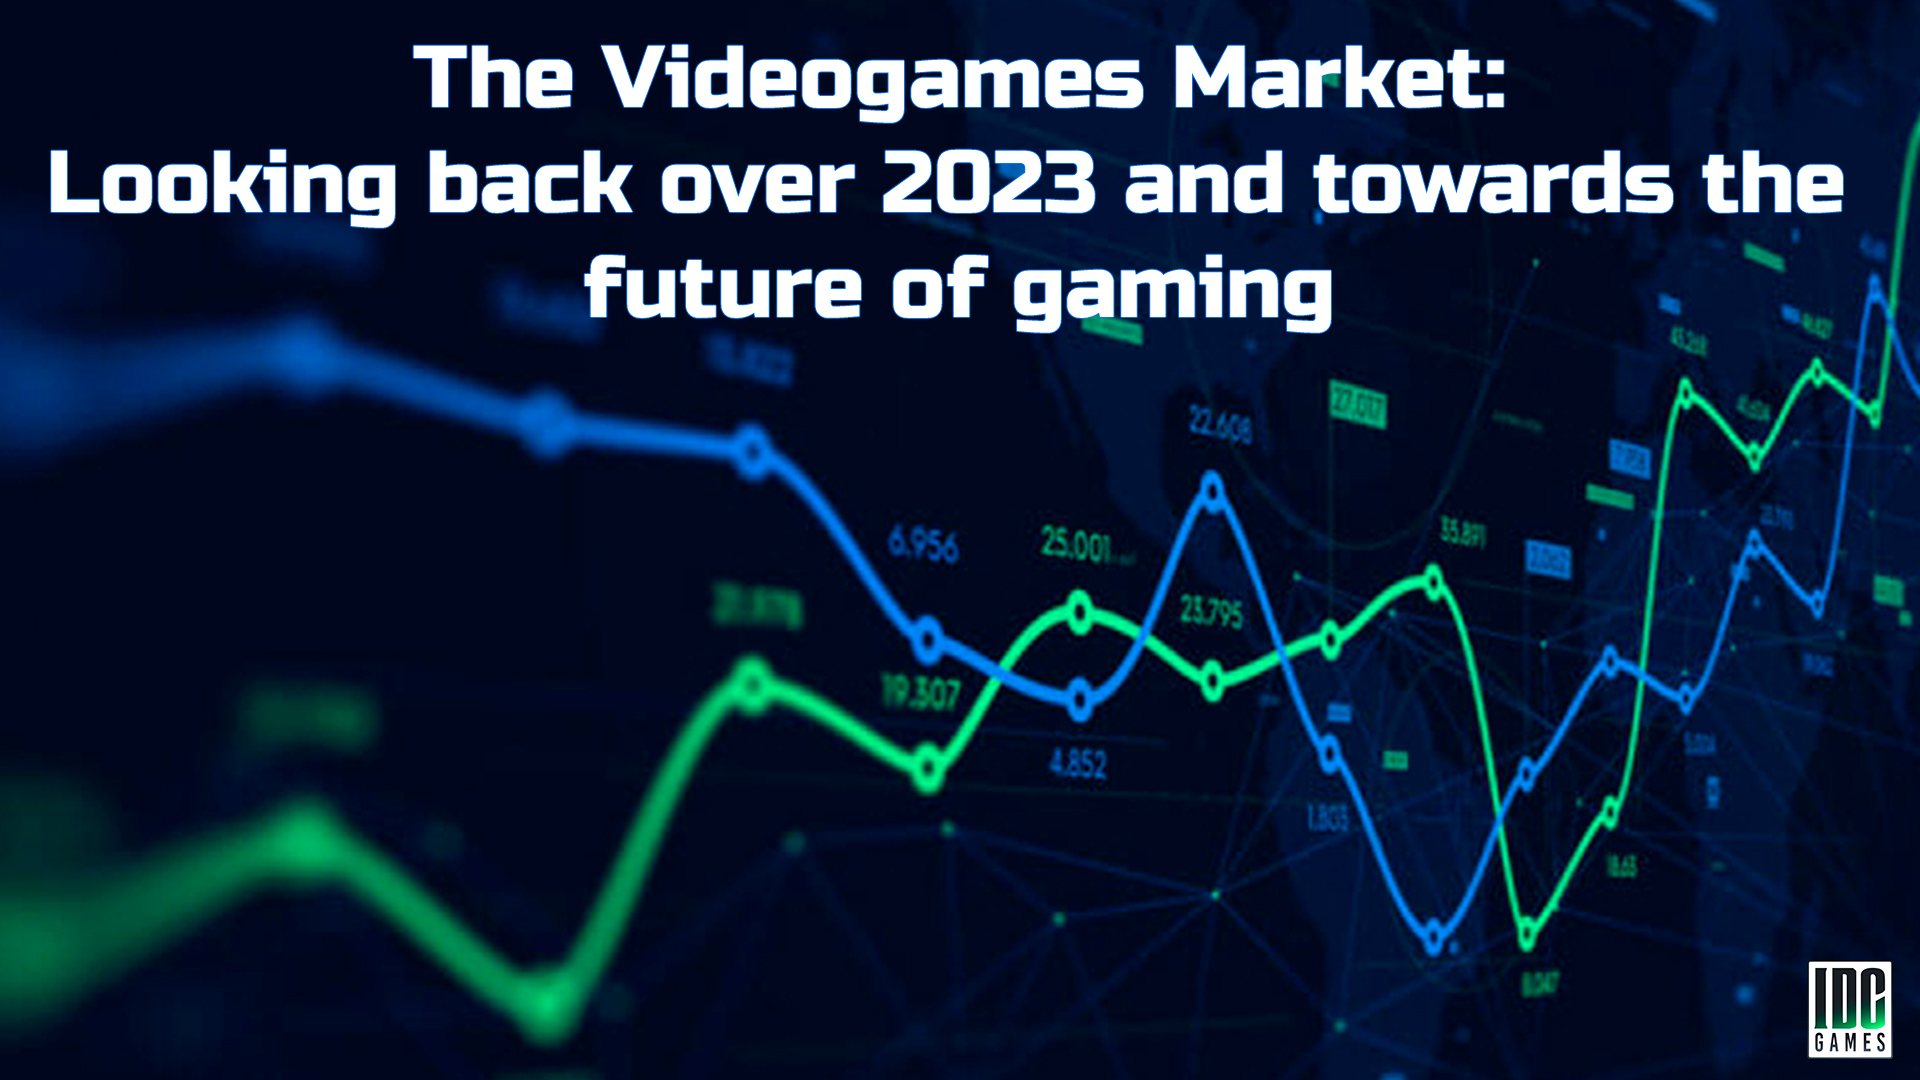 The Videogames Market: Looking back over 2023 and towards the future of gaming